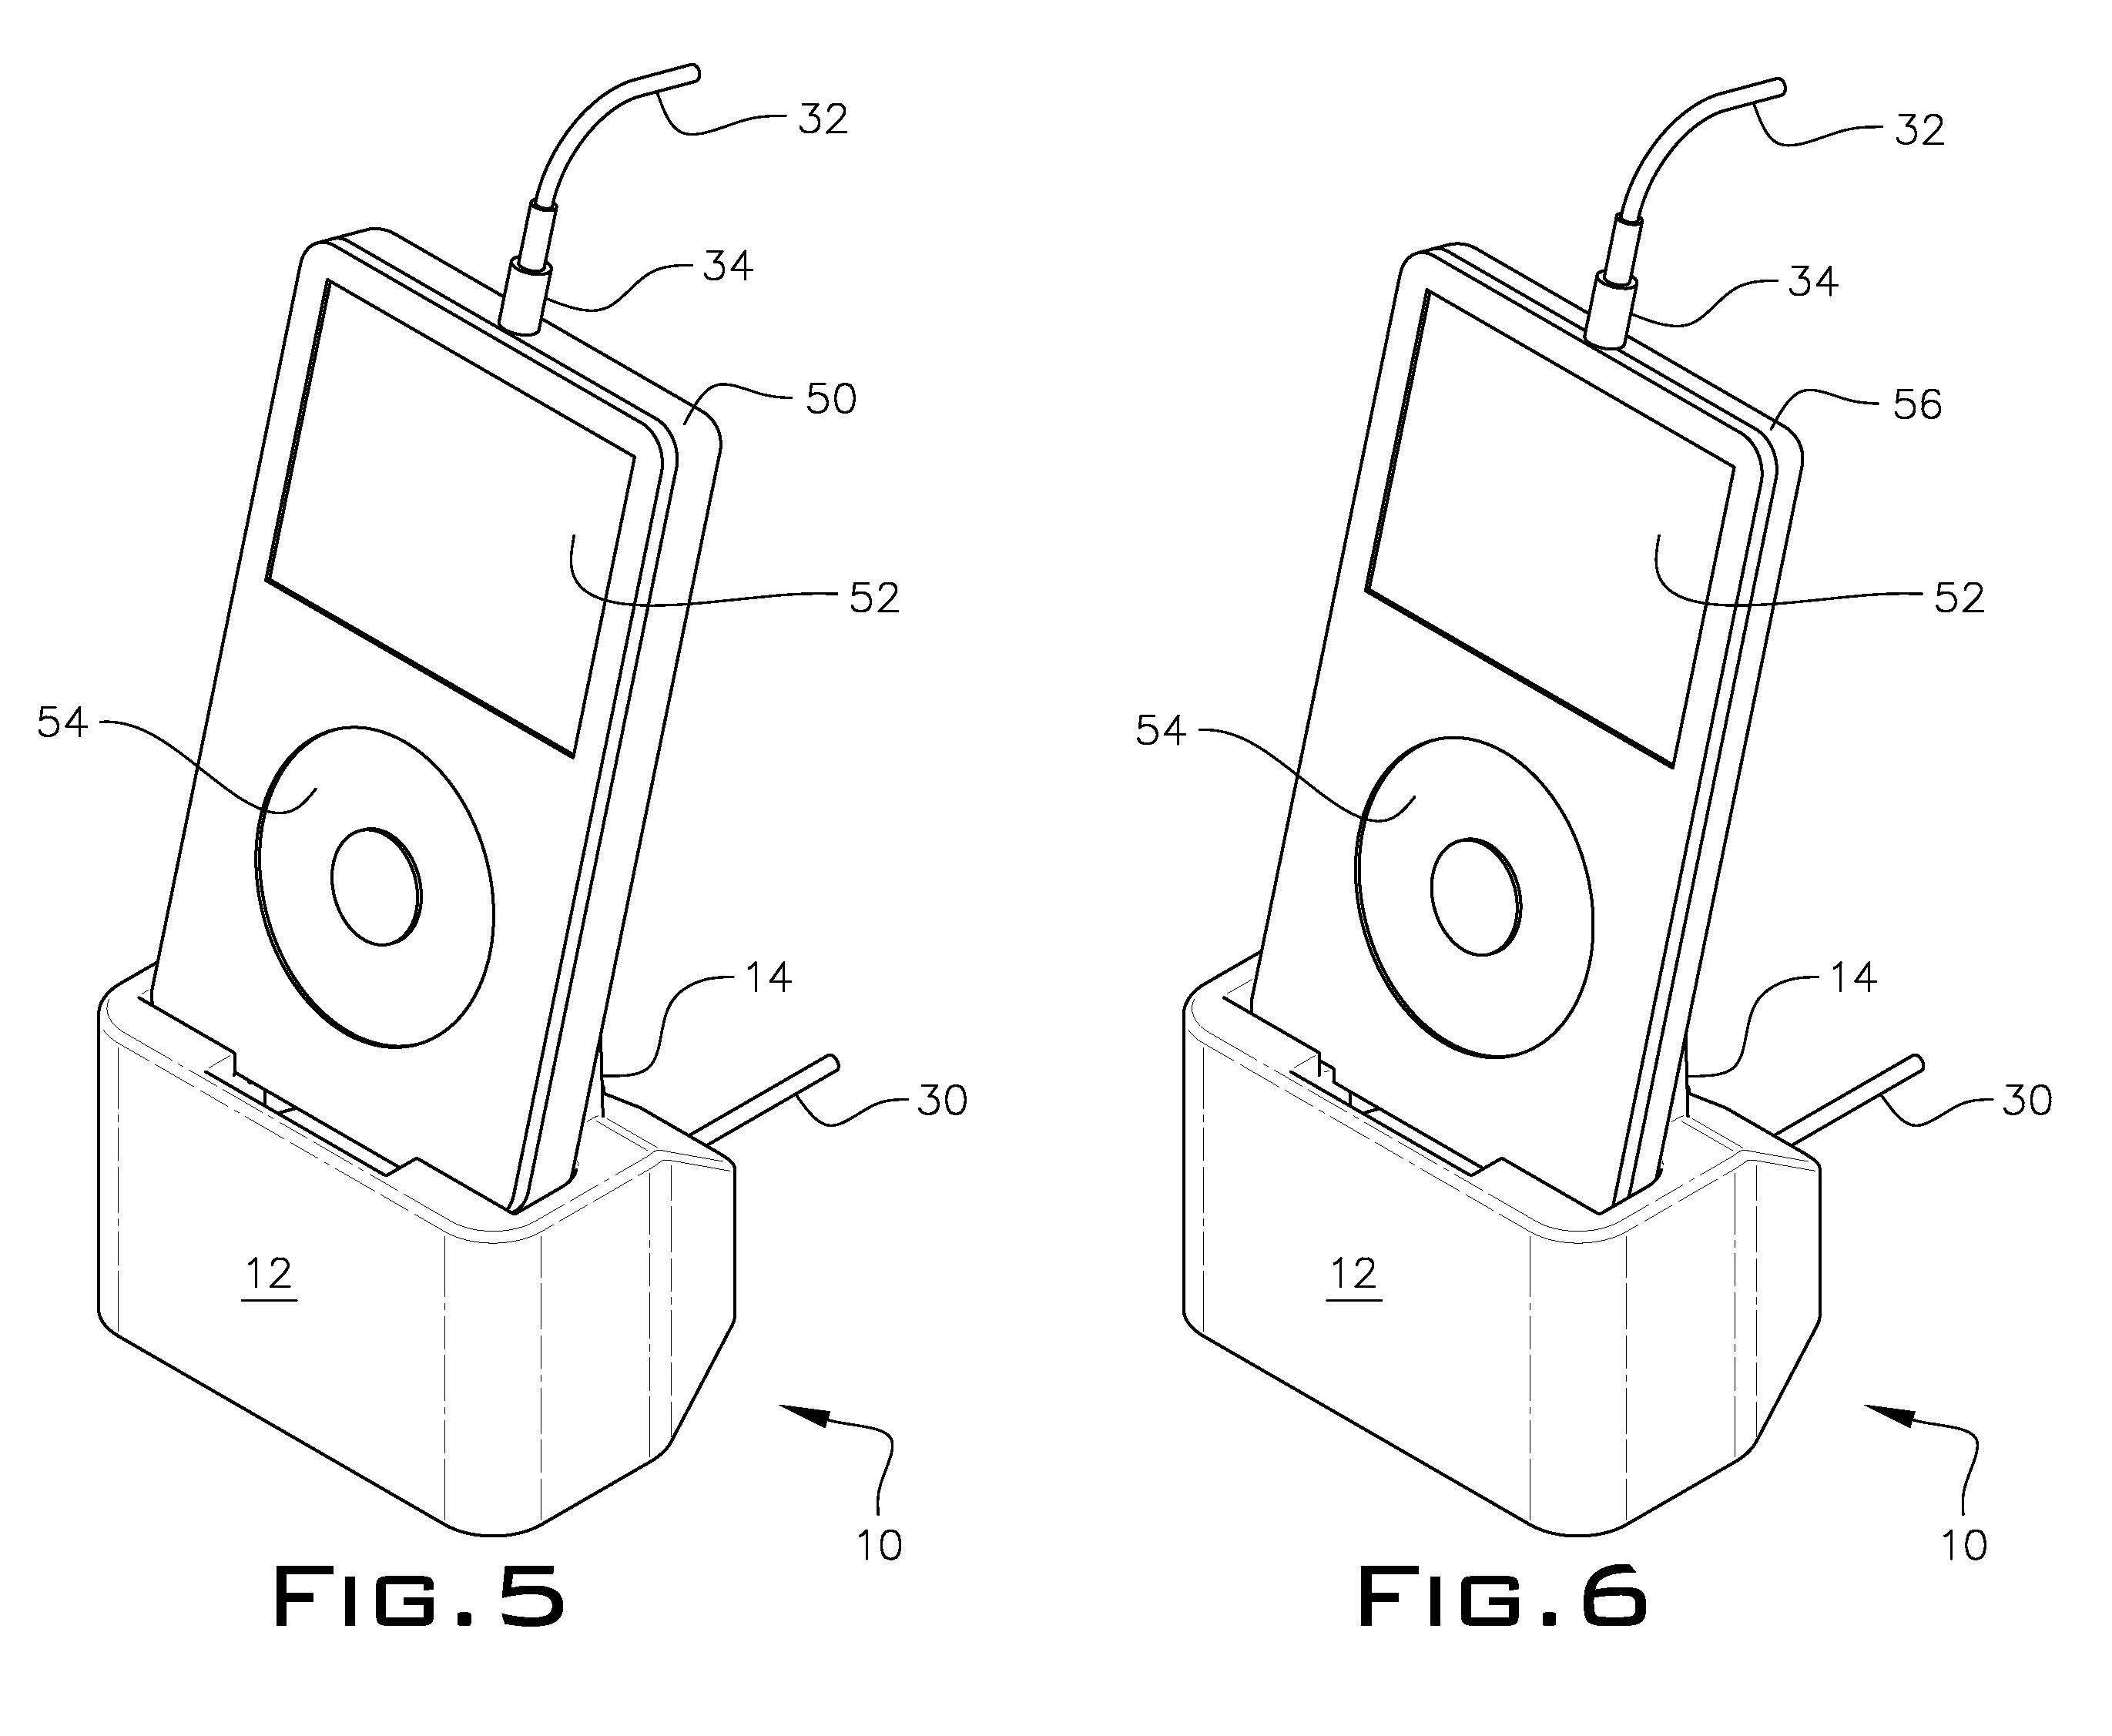 Dok Solution Patent for Adaptable Digital Music Player Cradle